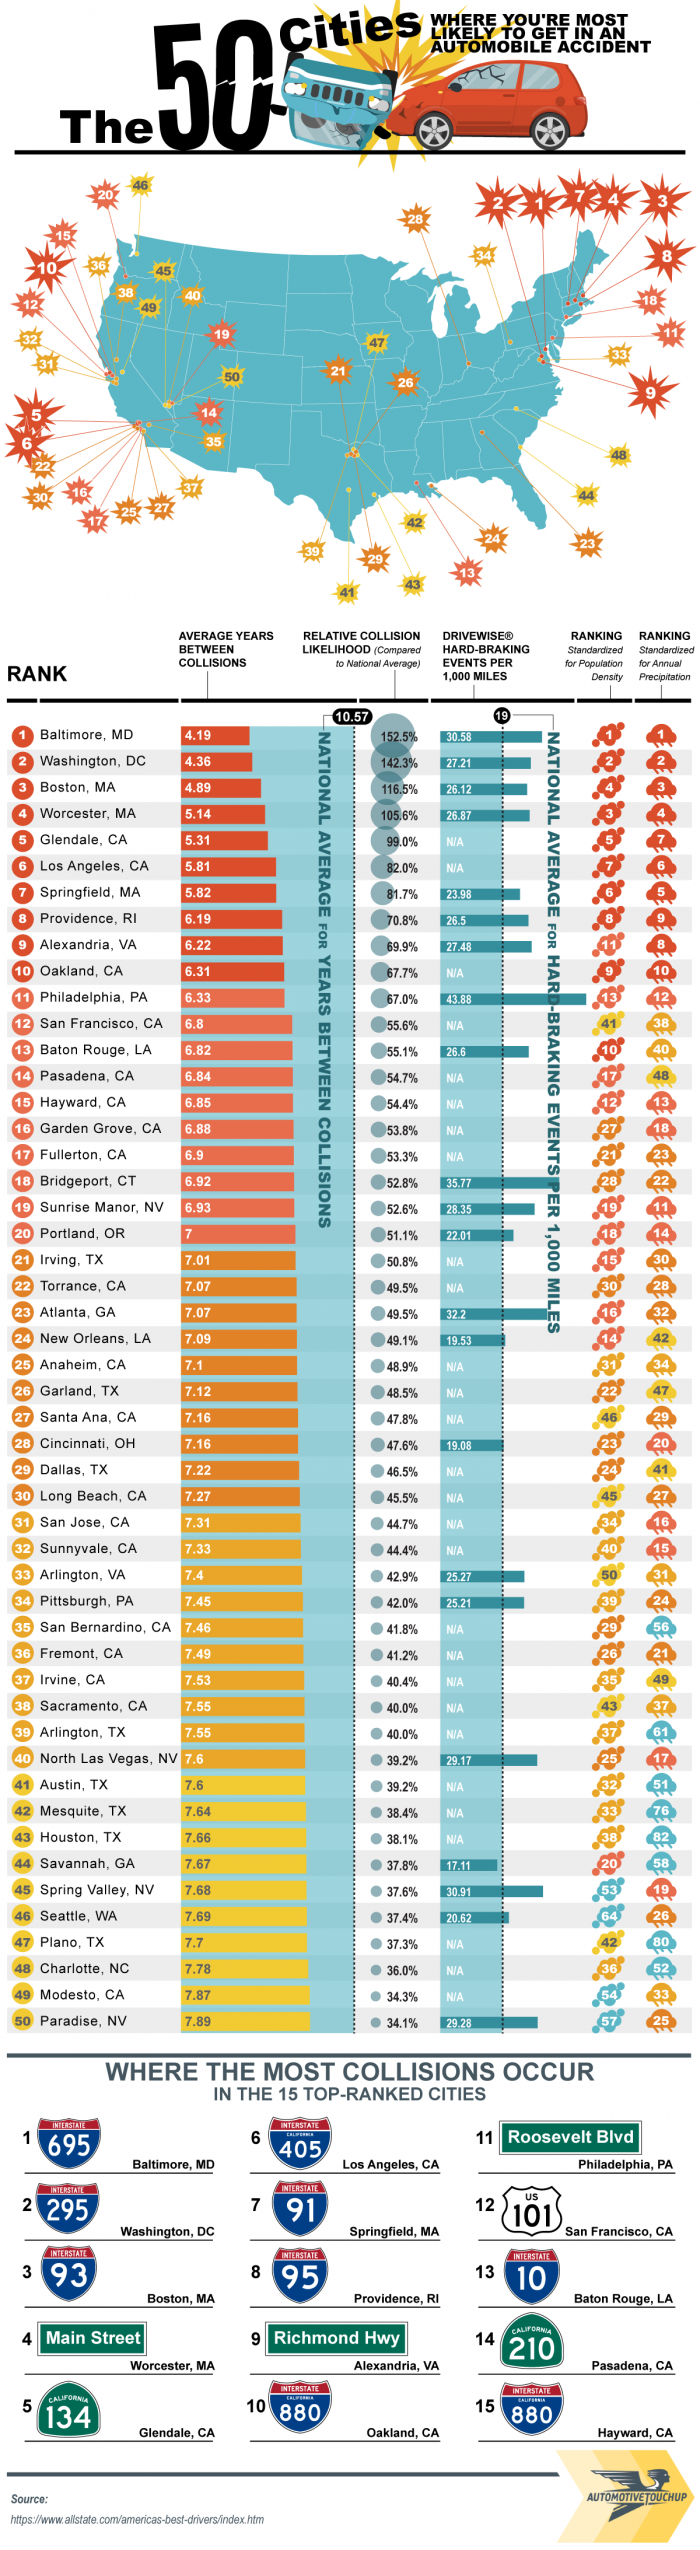 Cities Highest Rate Accidents